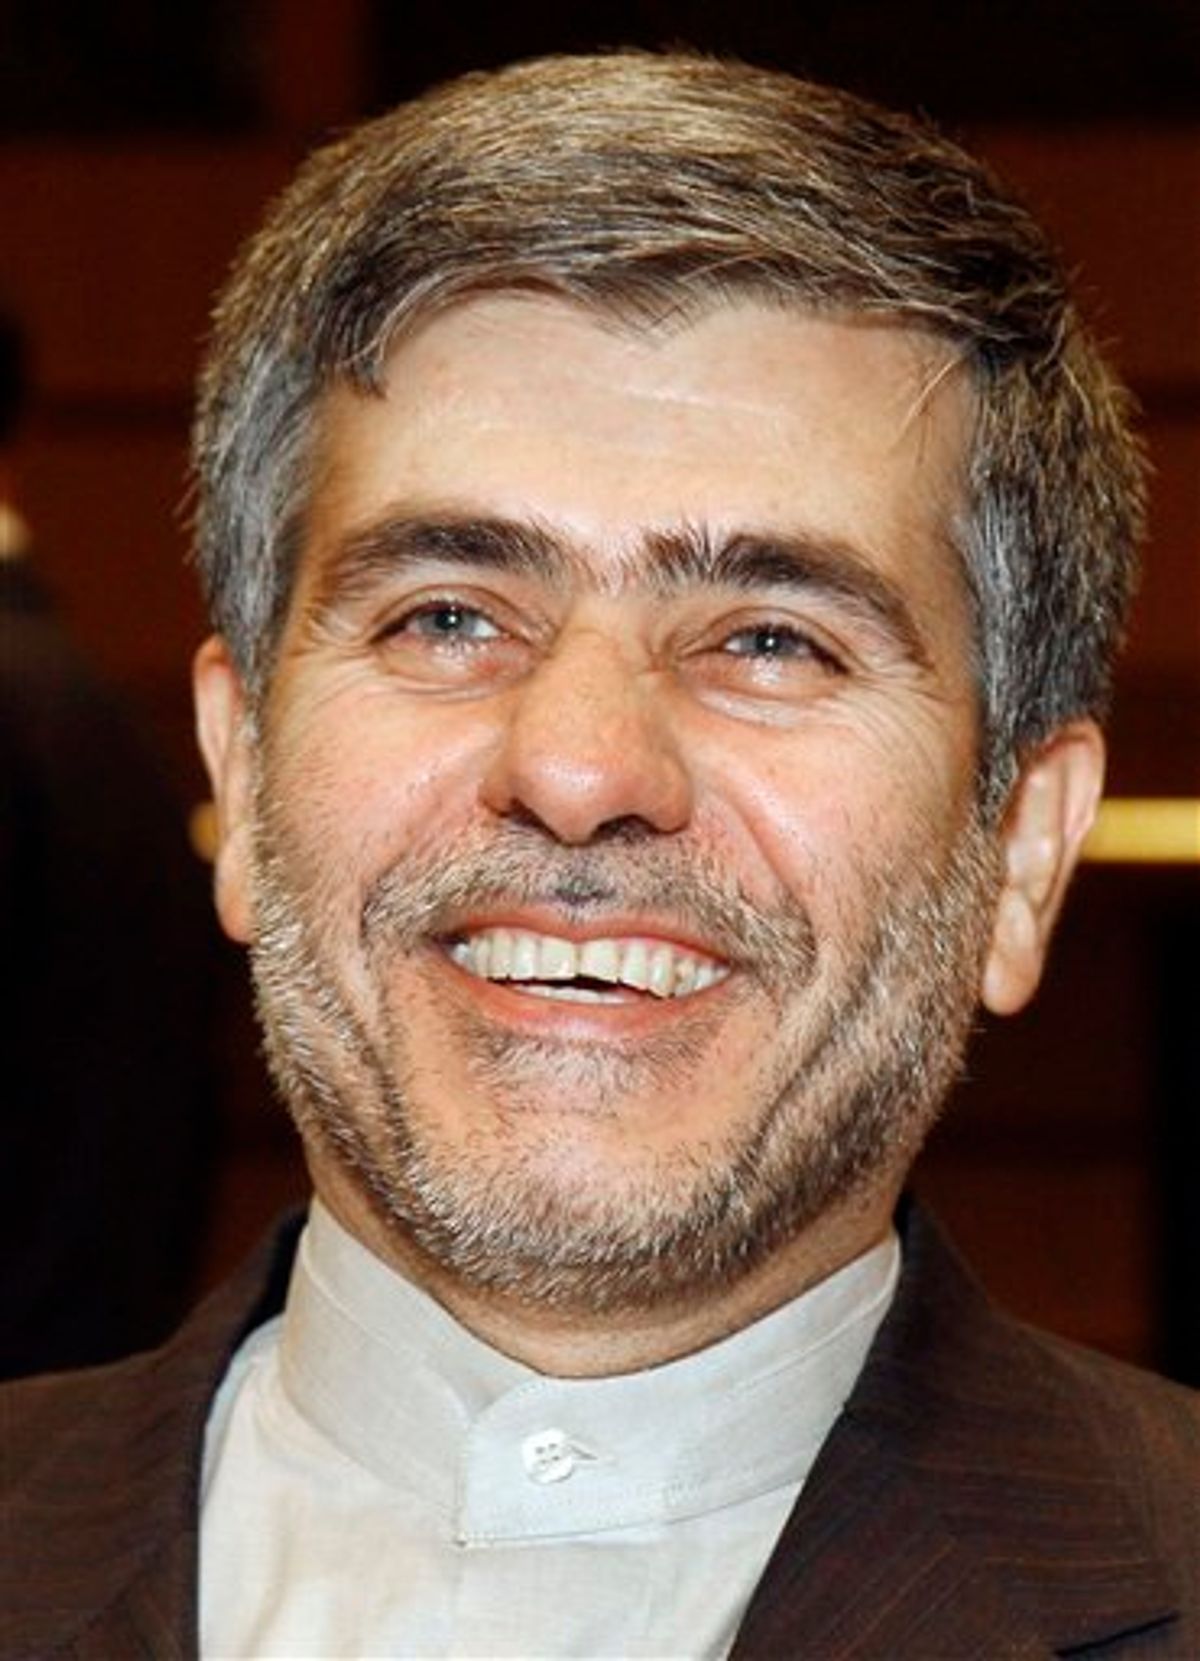 Fereidoun Abbasi Davani, Iran's Vice President and Head of Atomic Energy Organization, smiles during at the Ministerial Conference on Nuclear Safety at the International Atomic Energy Agency, IAEA, in Vienna, Austria, on Monday, June 20, 2011. (AP Photo/Ronald Zak)  (AP)